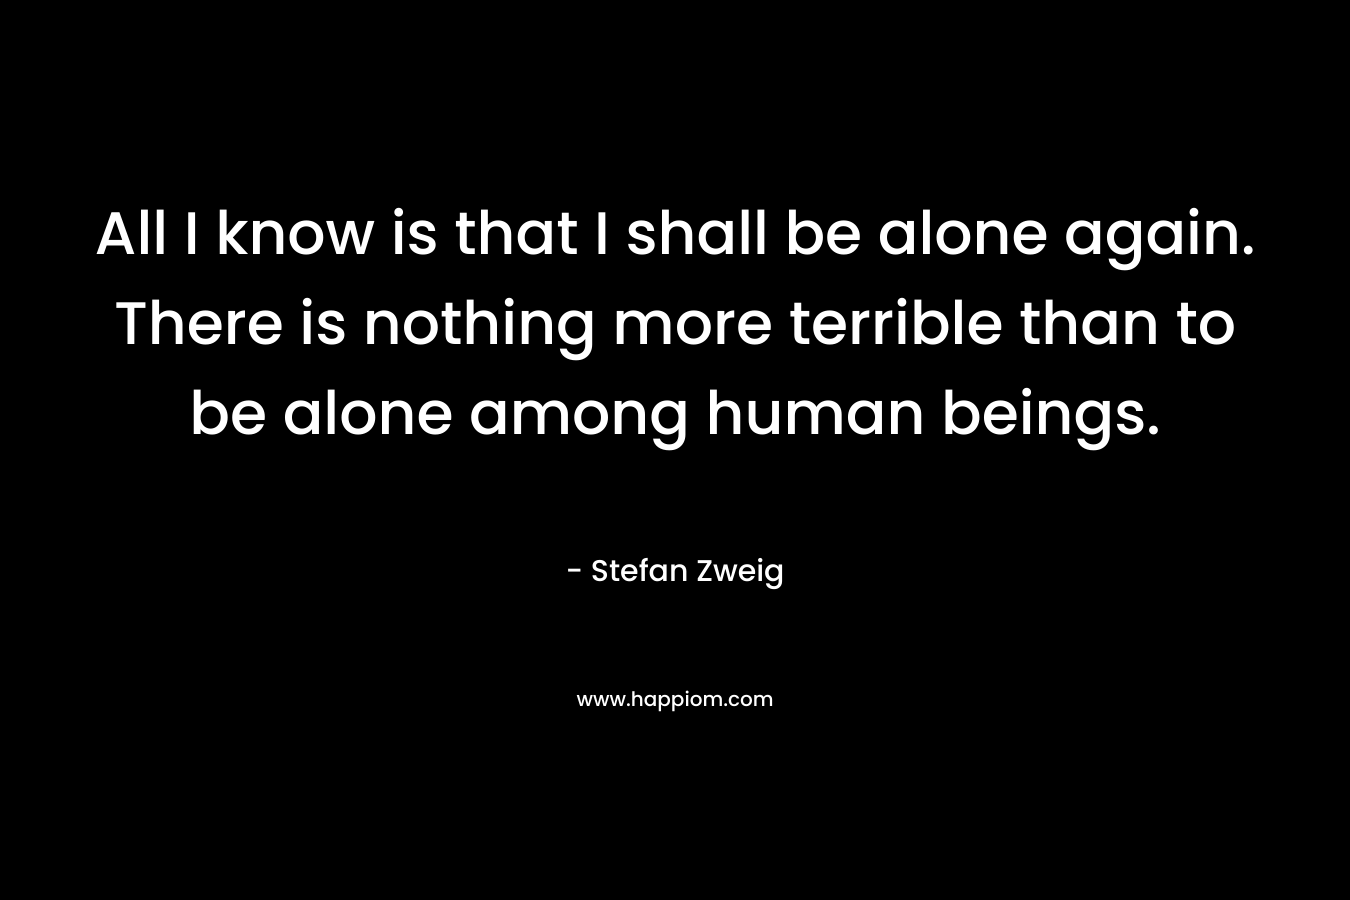 All I know is that I shall be alone again. There is nothing more terrible than to be alone among human beings. – Stefan Zweig